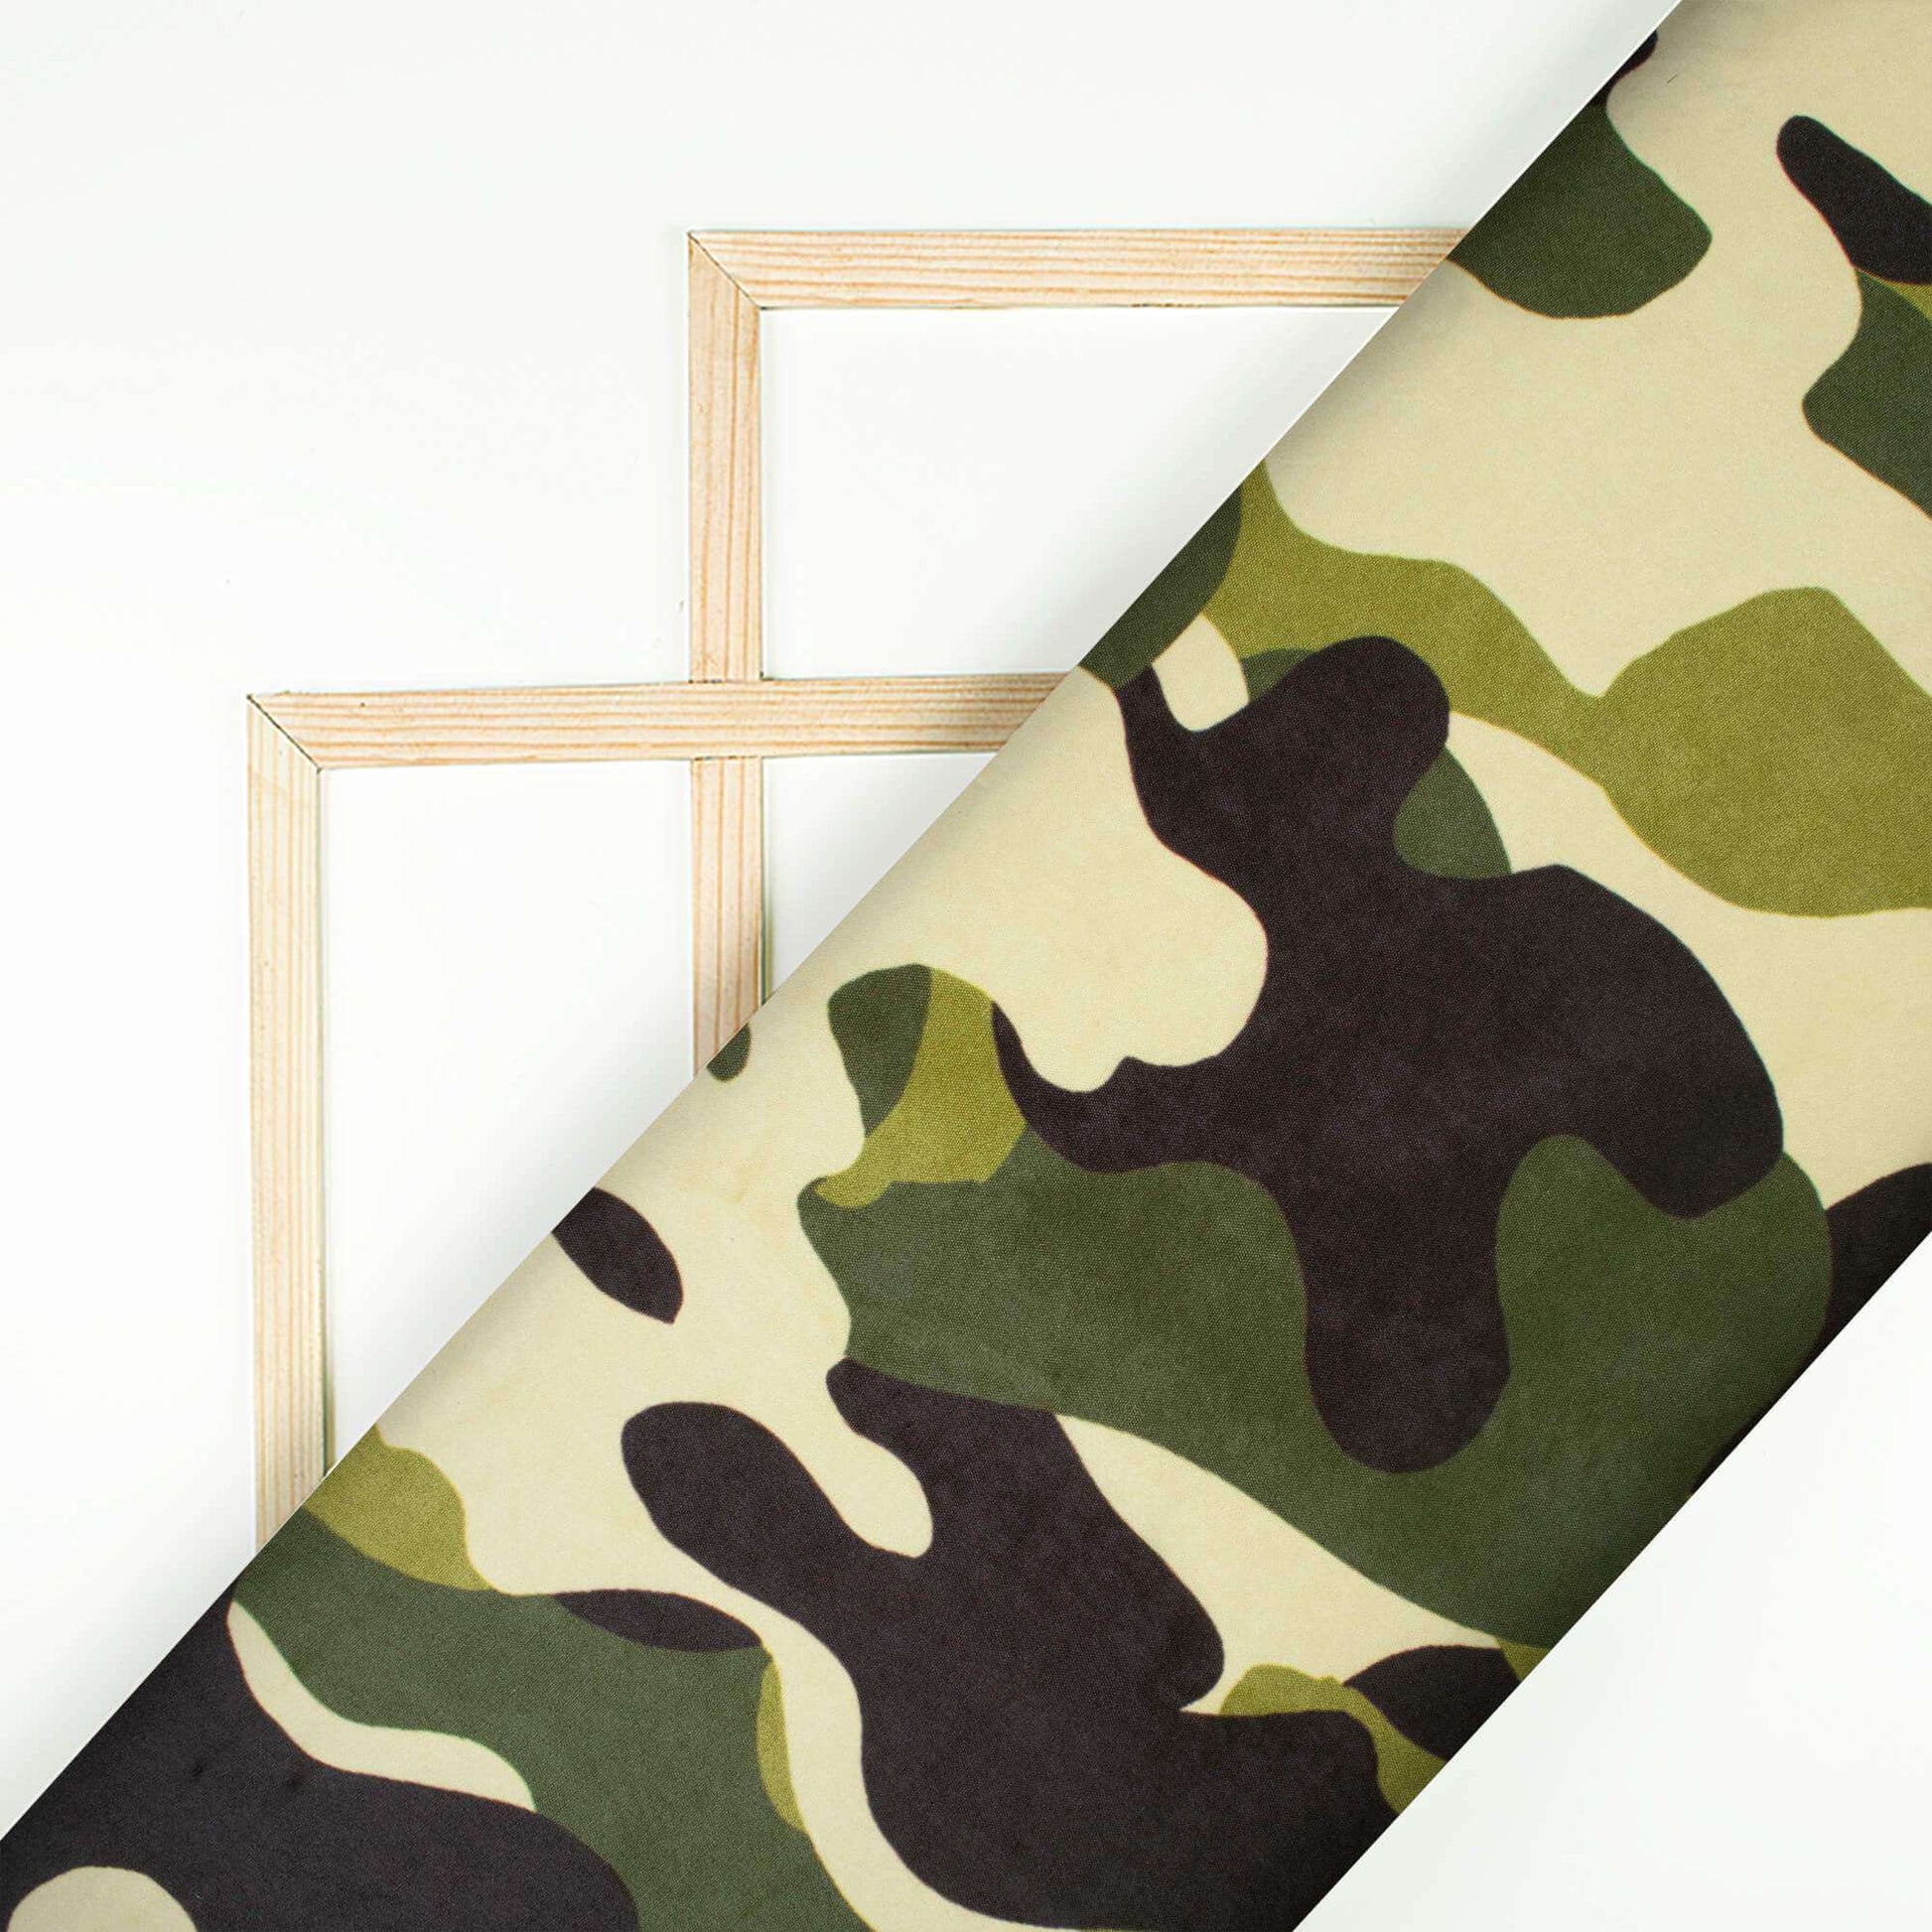 Army Green And Black Camouflage Digital Print Ultra Premium Butter Crepe Fabric - Fabcurate